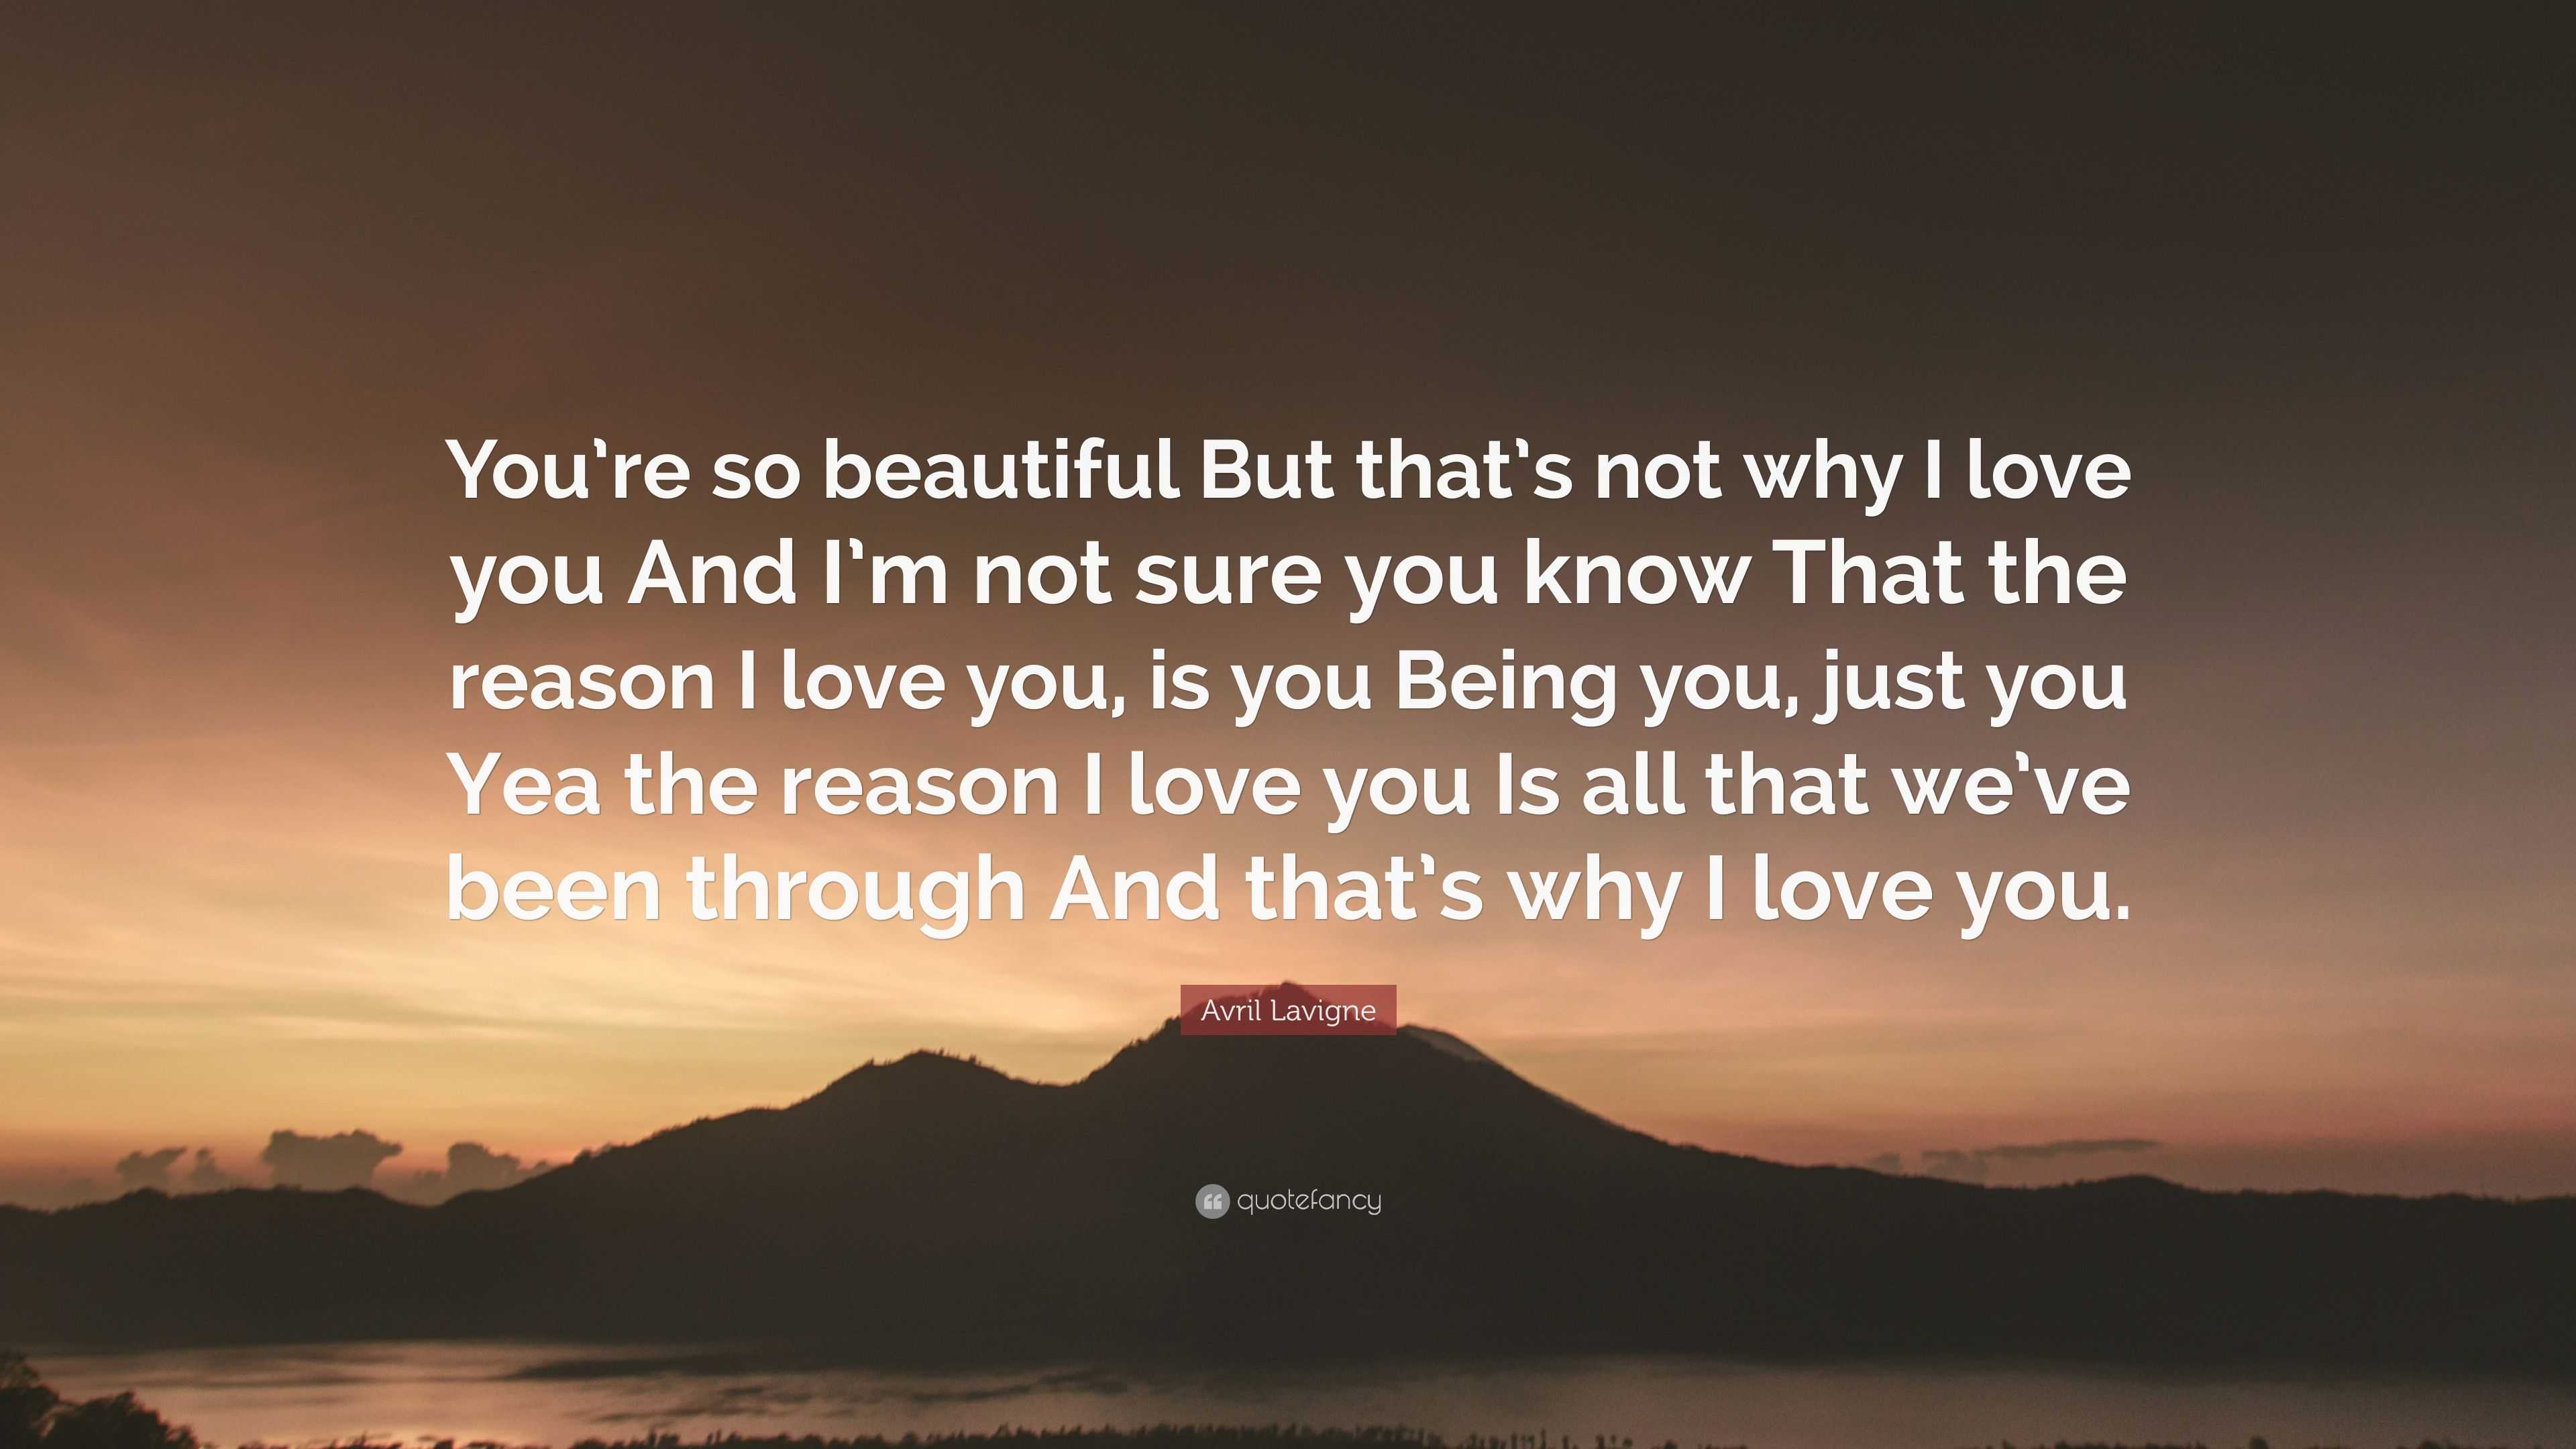 Avril Lavigne Quote: “You’re so beautiful But that’s not why I love you ...